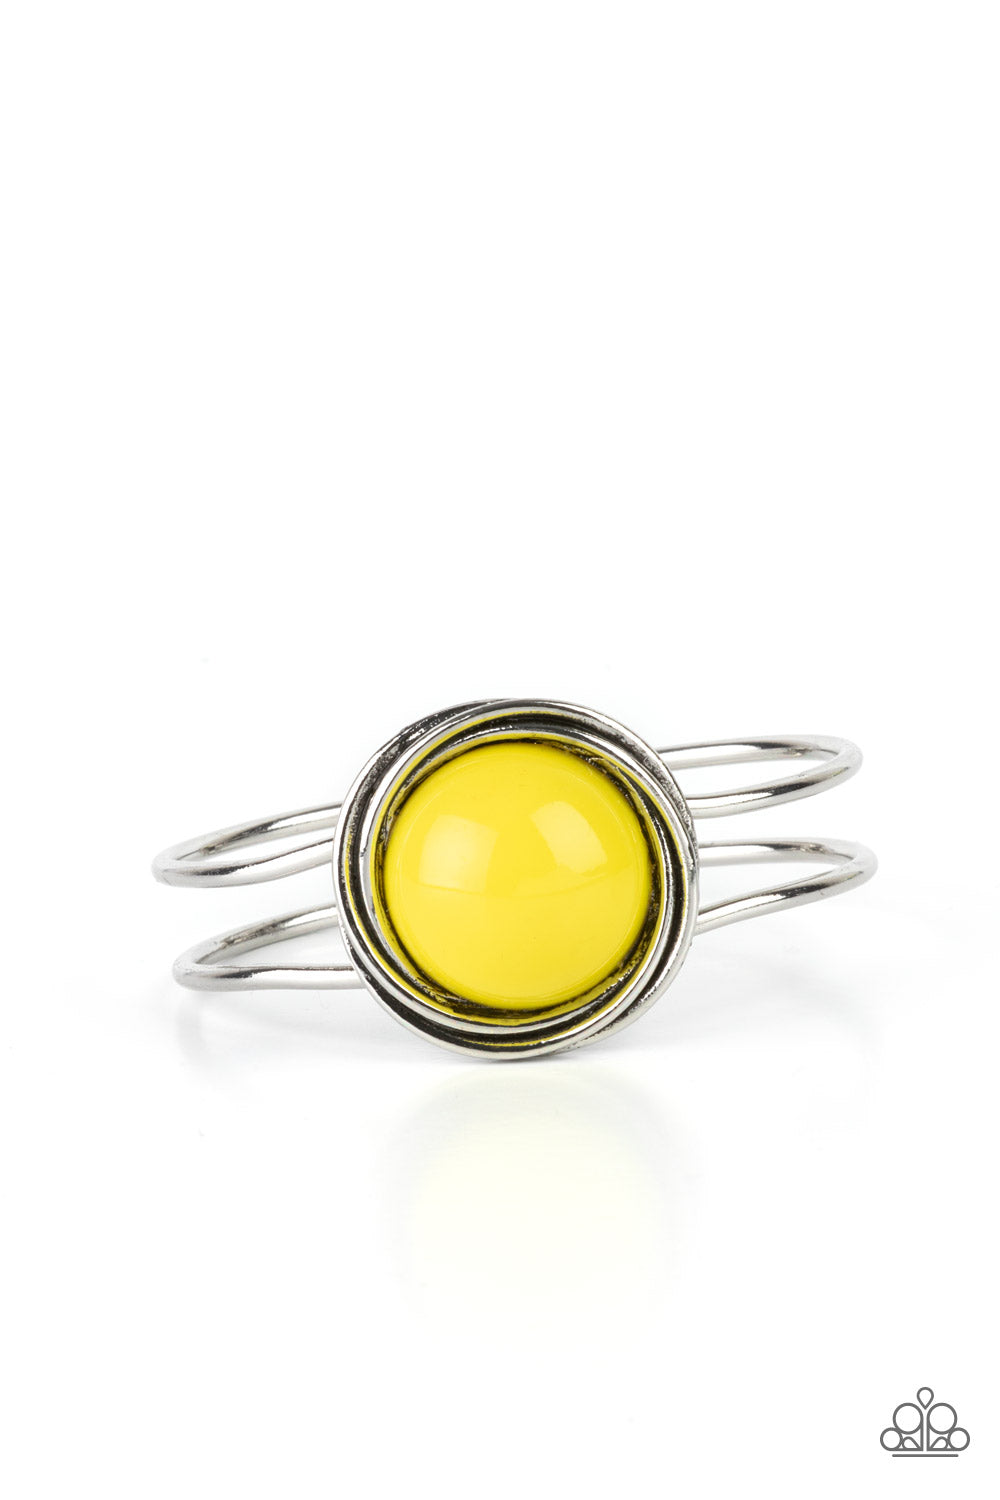 Take It From The POP! - Yellow Bracelet - Paparazzi Accessories